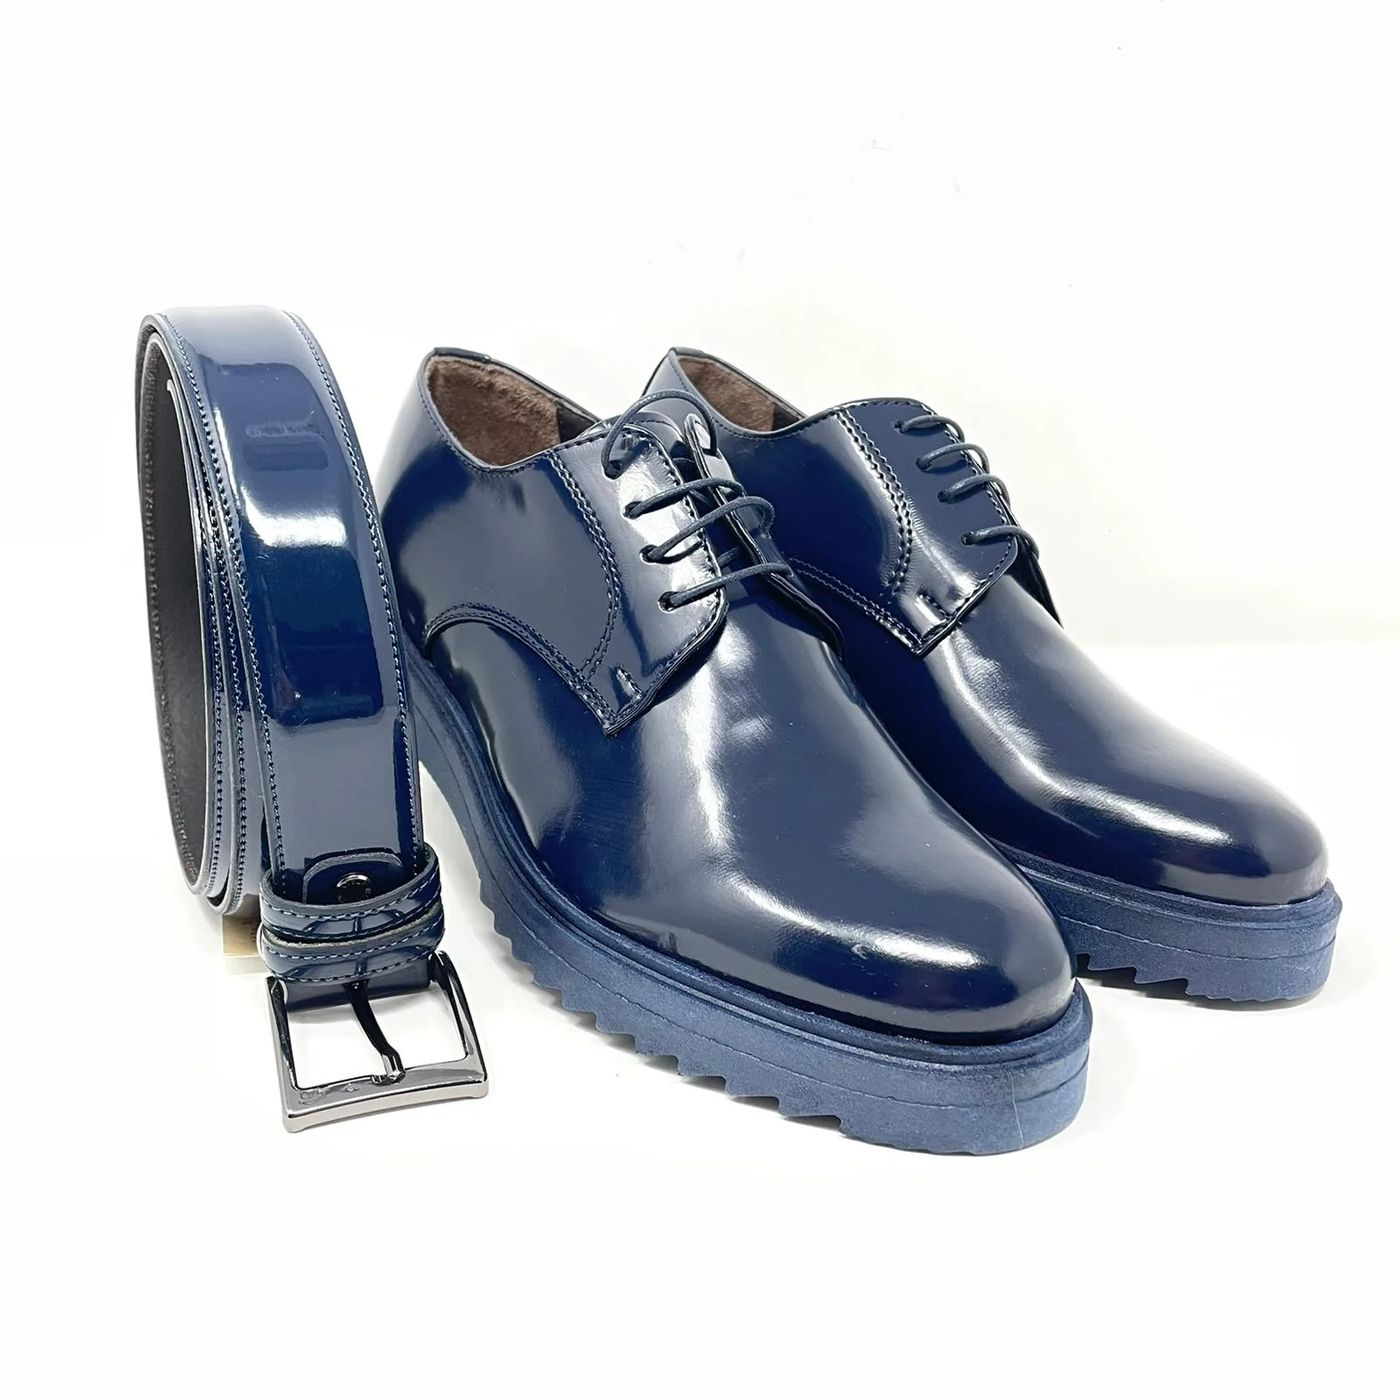 Patent leather lace-up shoes made in Italy